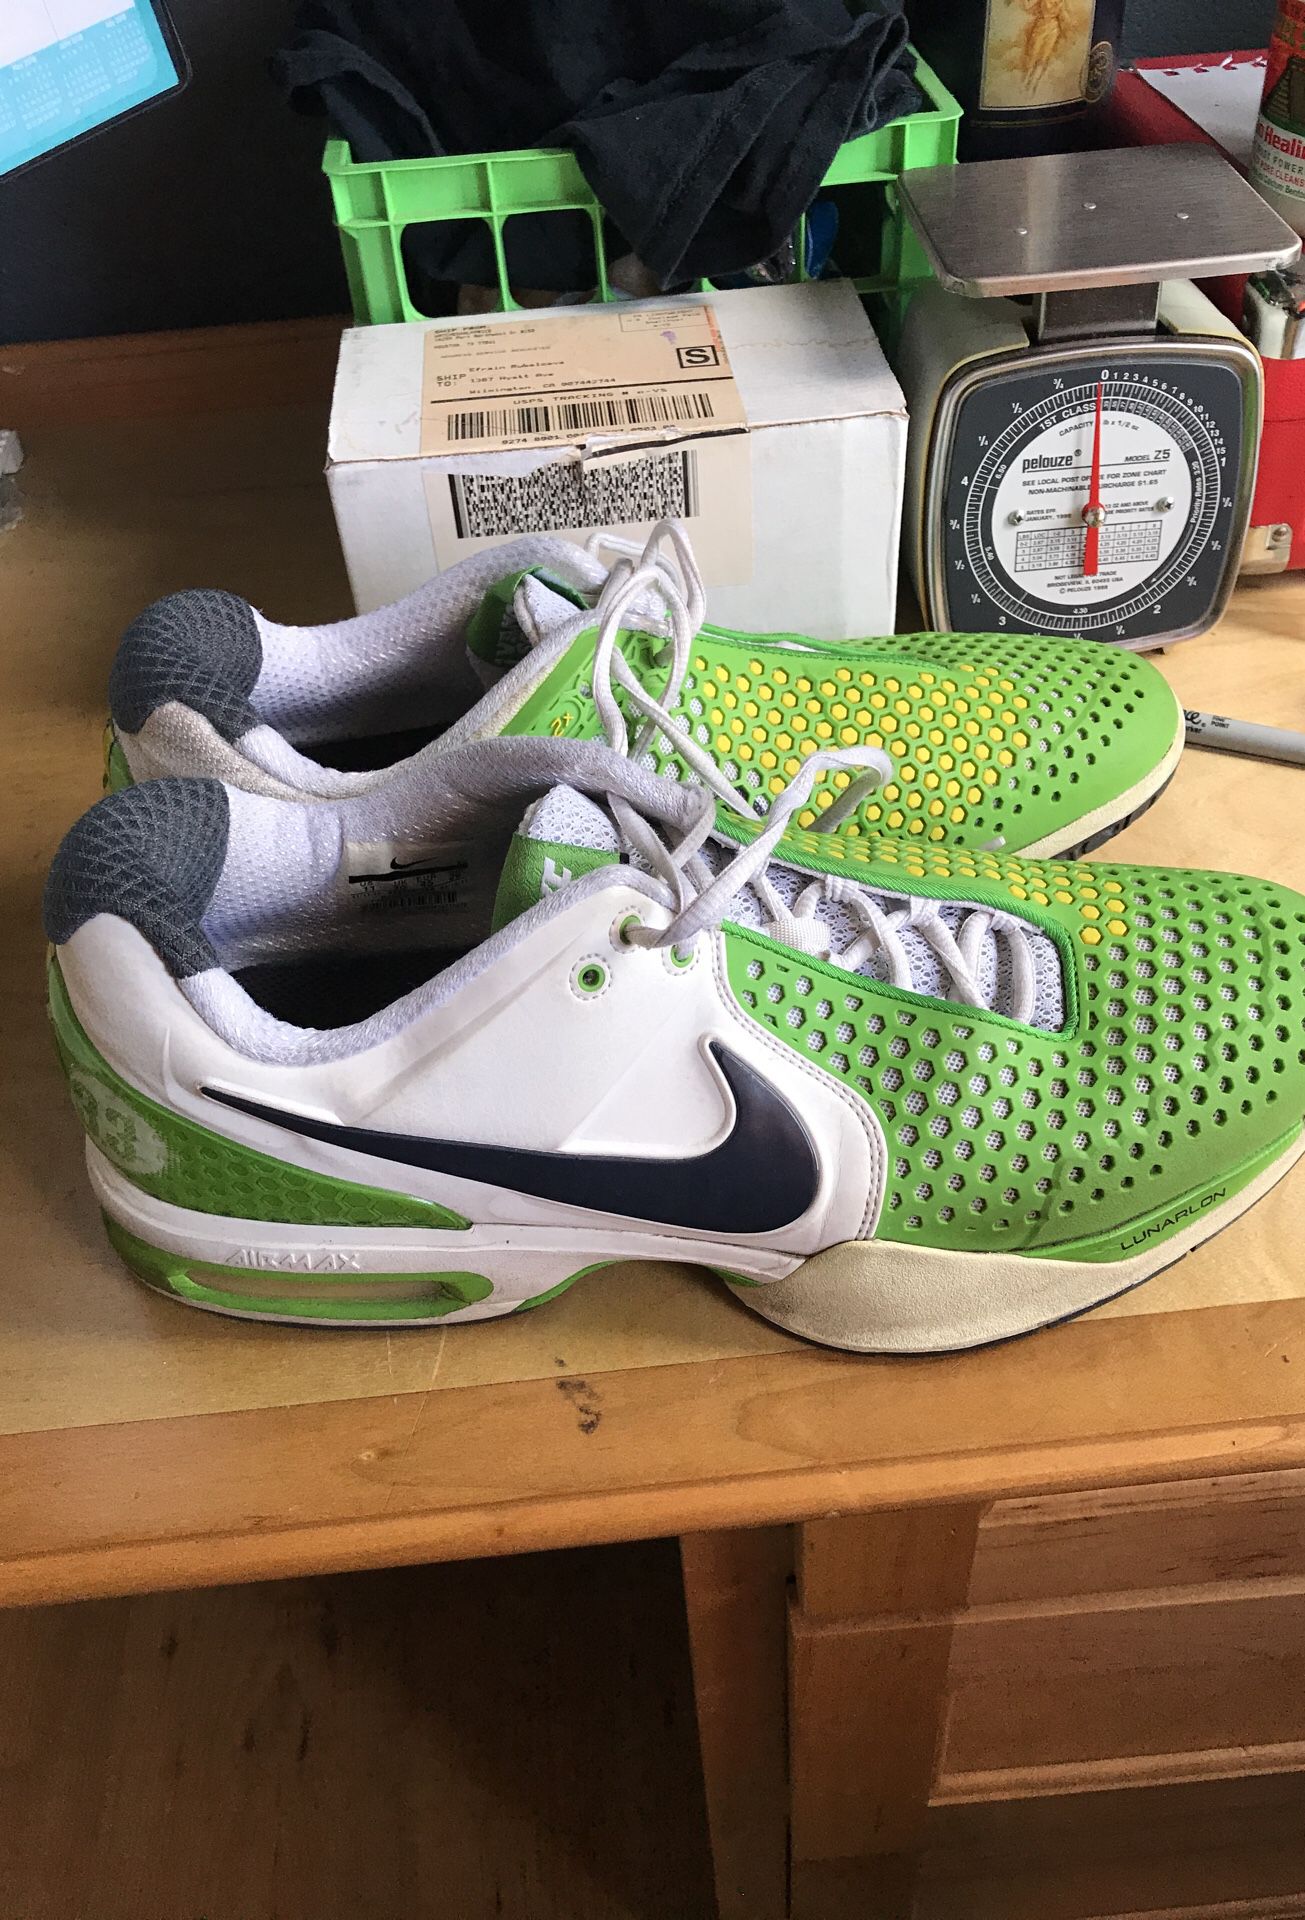 Air Max Courtballistec 3.3 -white - Green Apple -True Basketball shoes for Sale in Los Angeles, - OfferUp